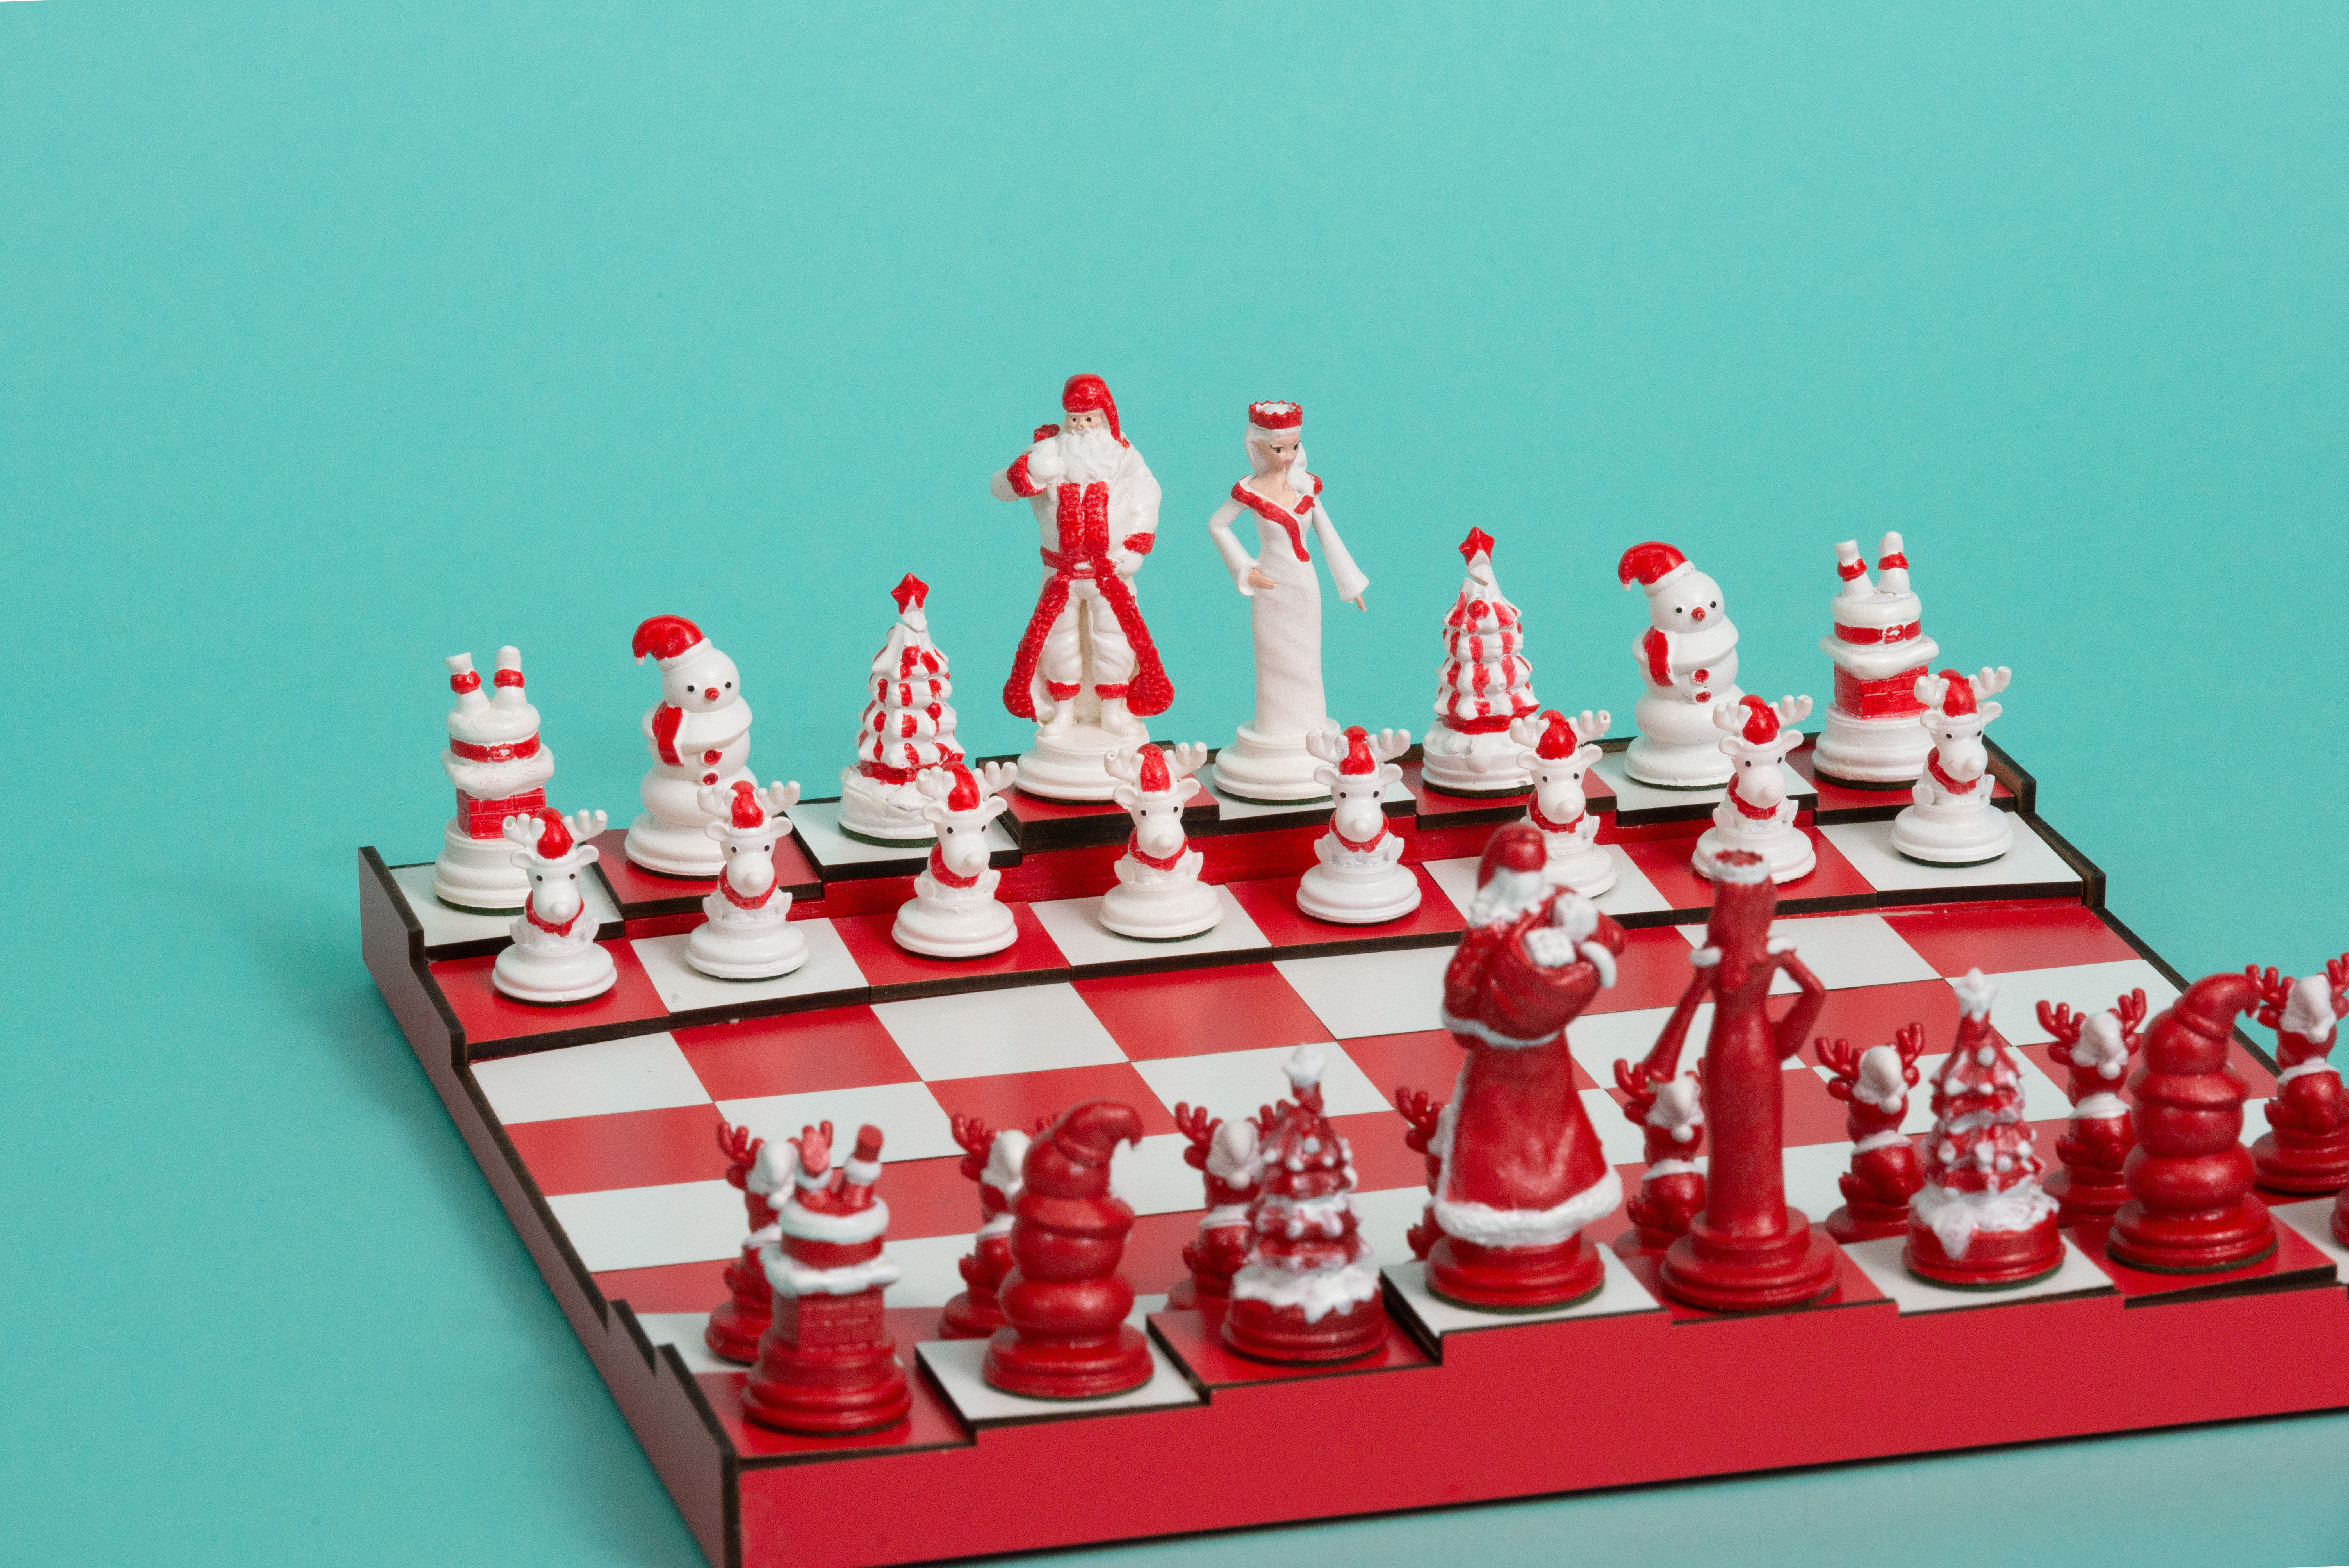 Look at this Fully Playable Chess Set and Board Made Entirely from VHS –  Lunchmeat